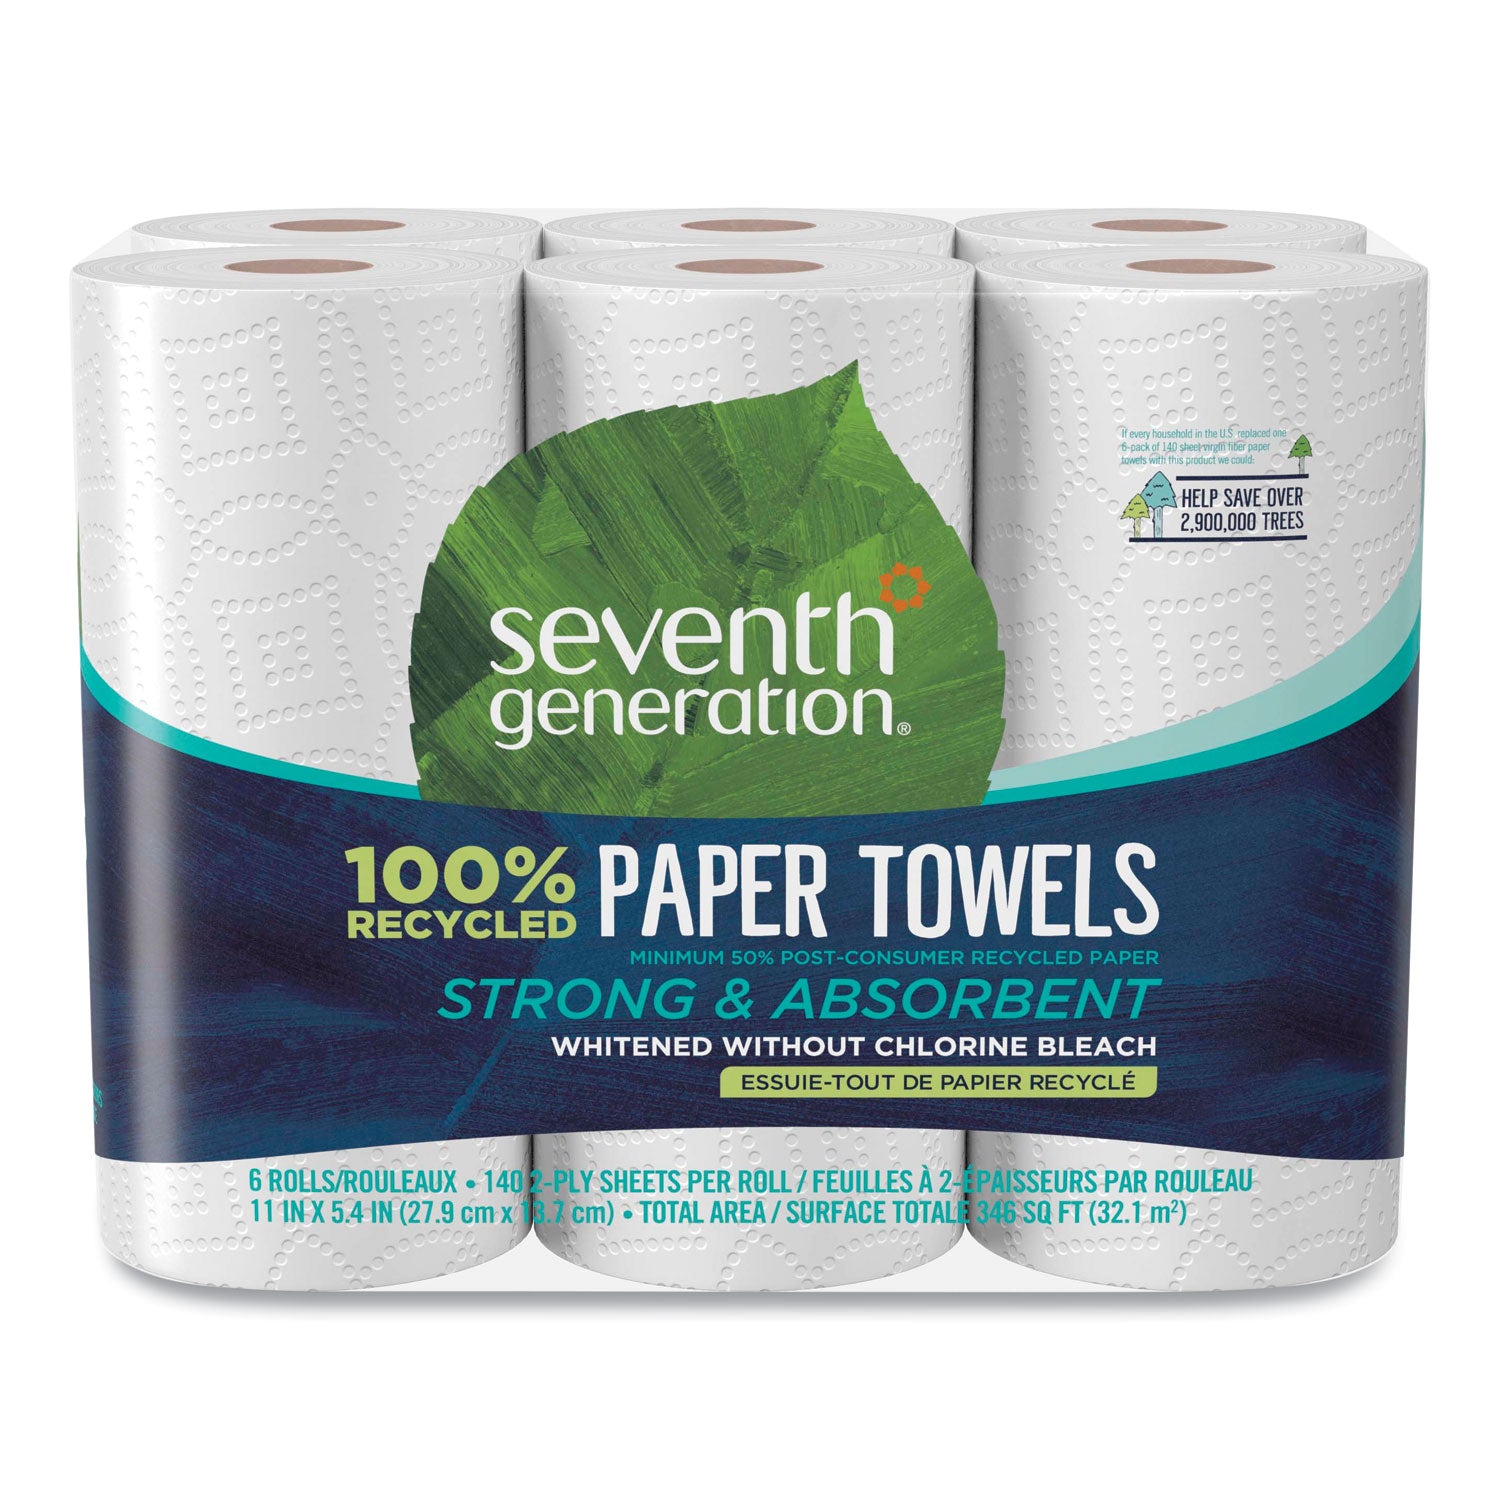 100% Recycled Paper Kitchen Towel Rolls, 2-Ply, 11 x 5.4, 140 Sheets/Roll, 6 Rolls/Pack - 